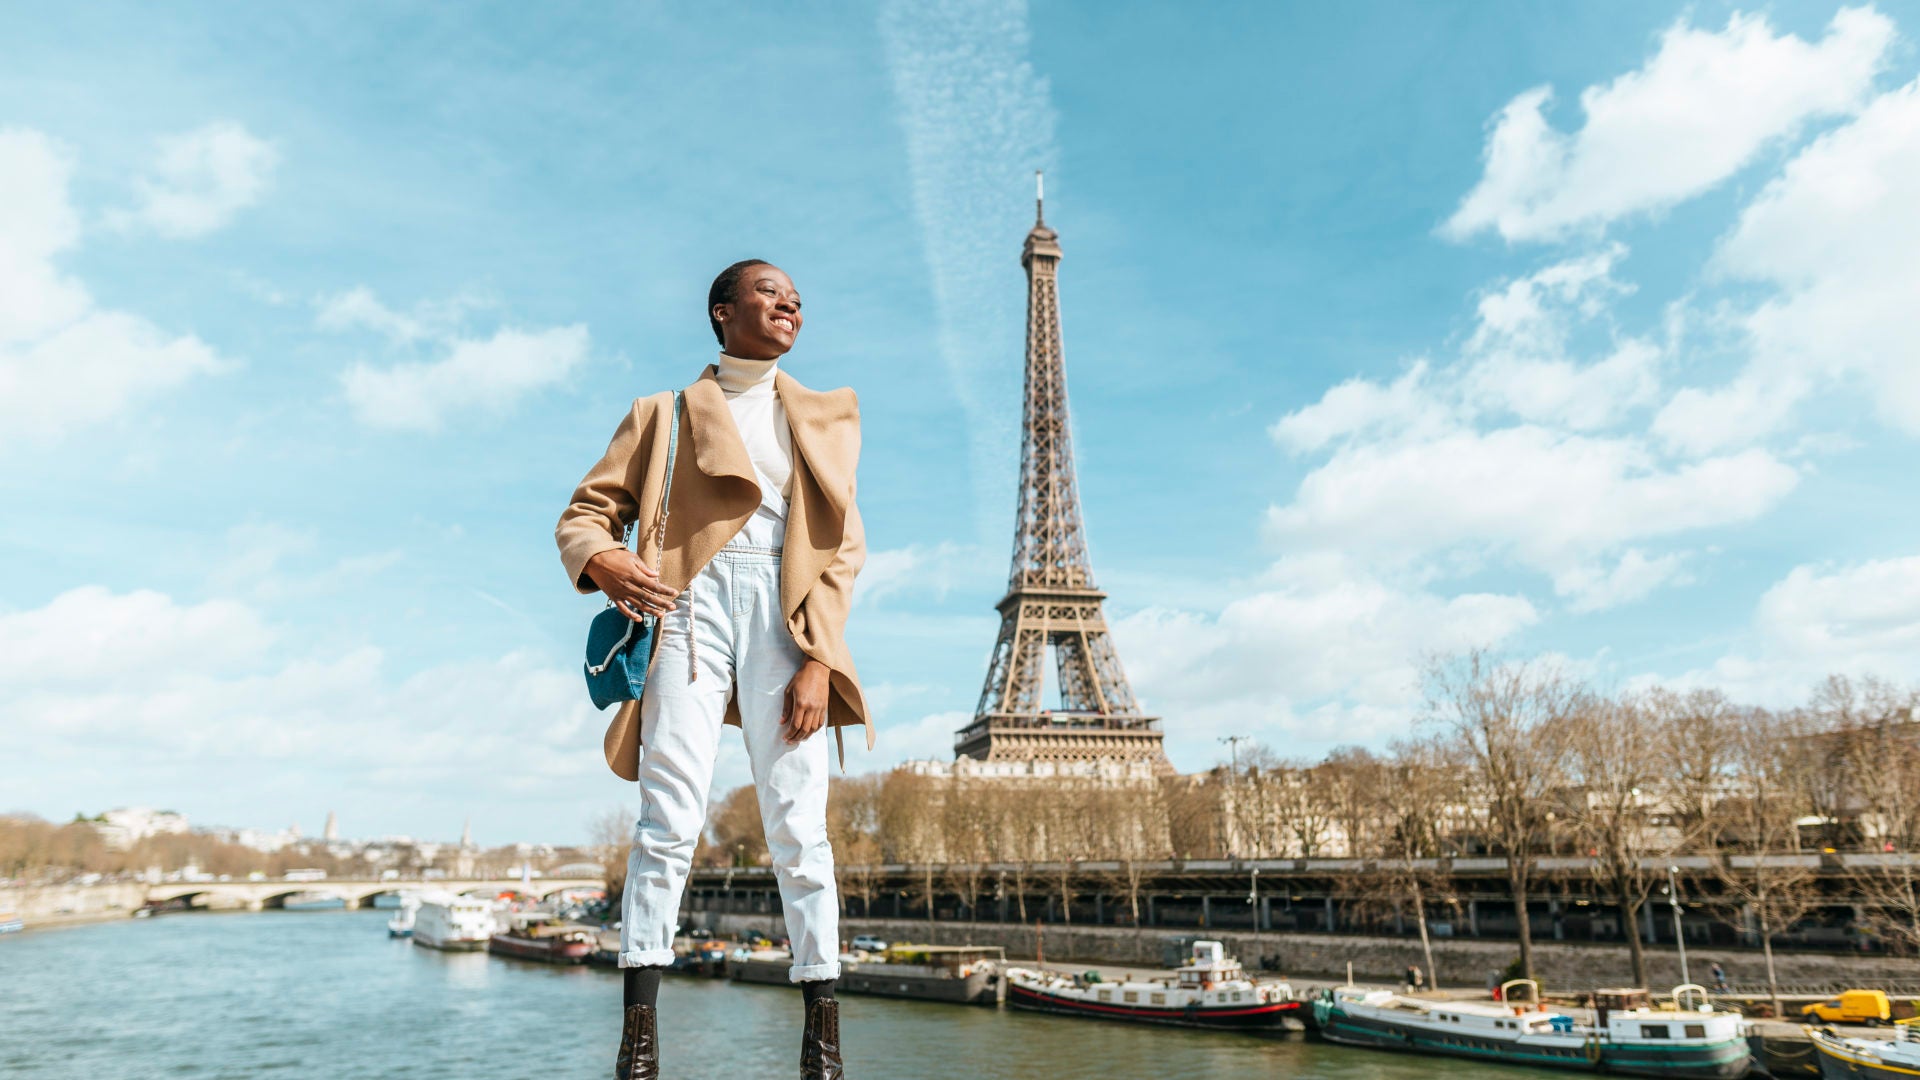 Trending in Travel: Free Accommodations, Foodie Museums, $247 Flights To Paris, And More!